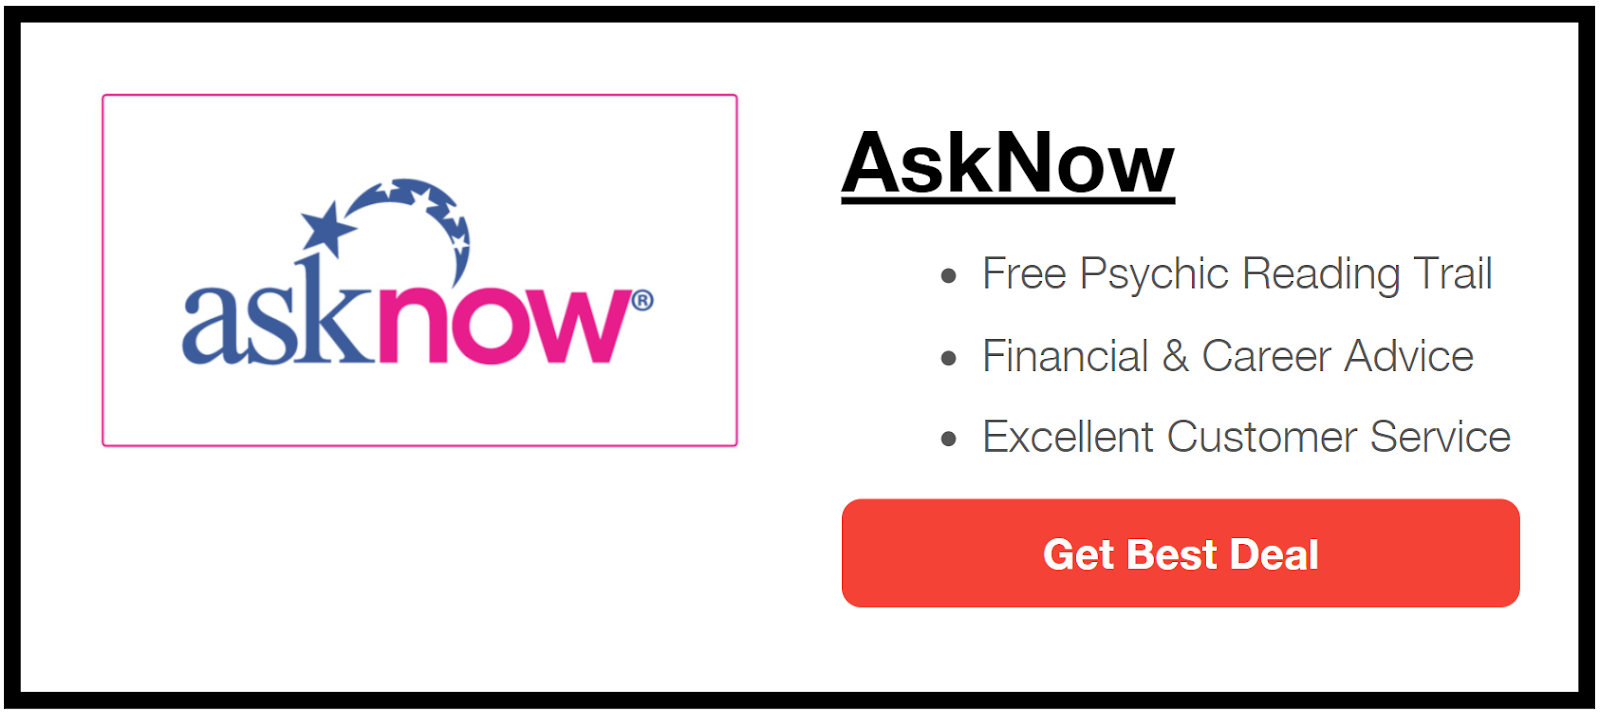 AskNow logo on the right with words on the right side